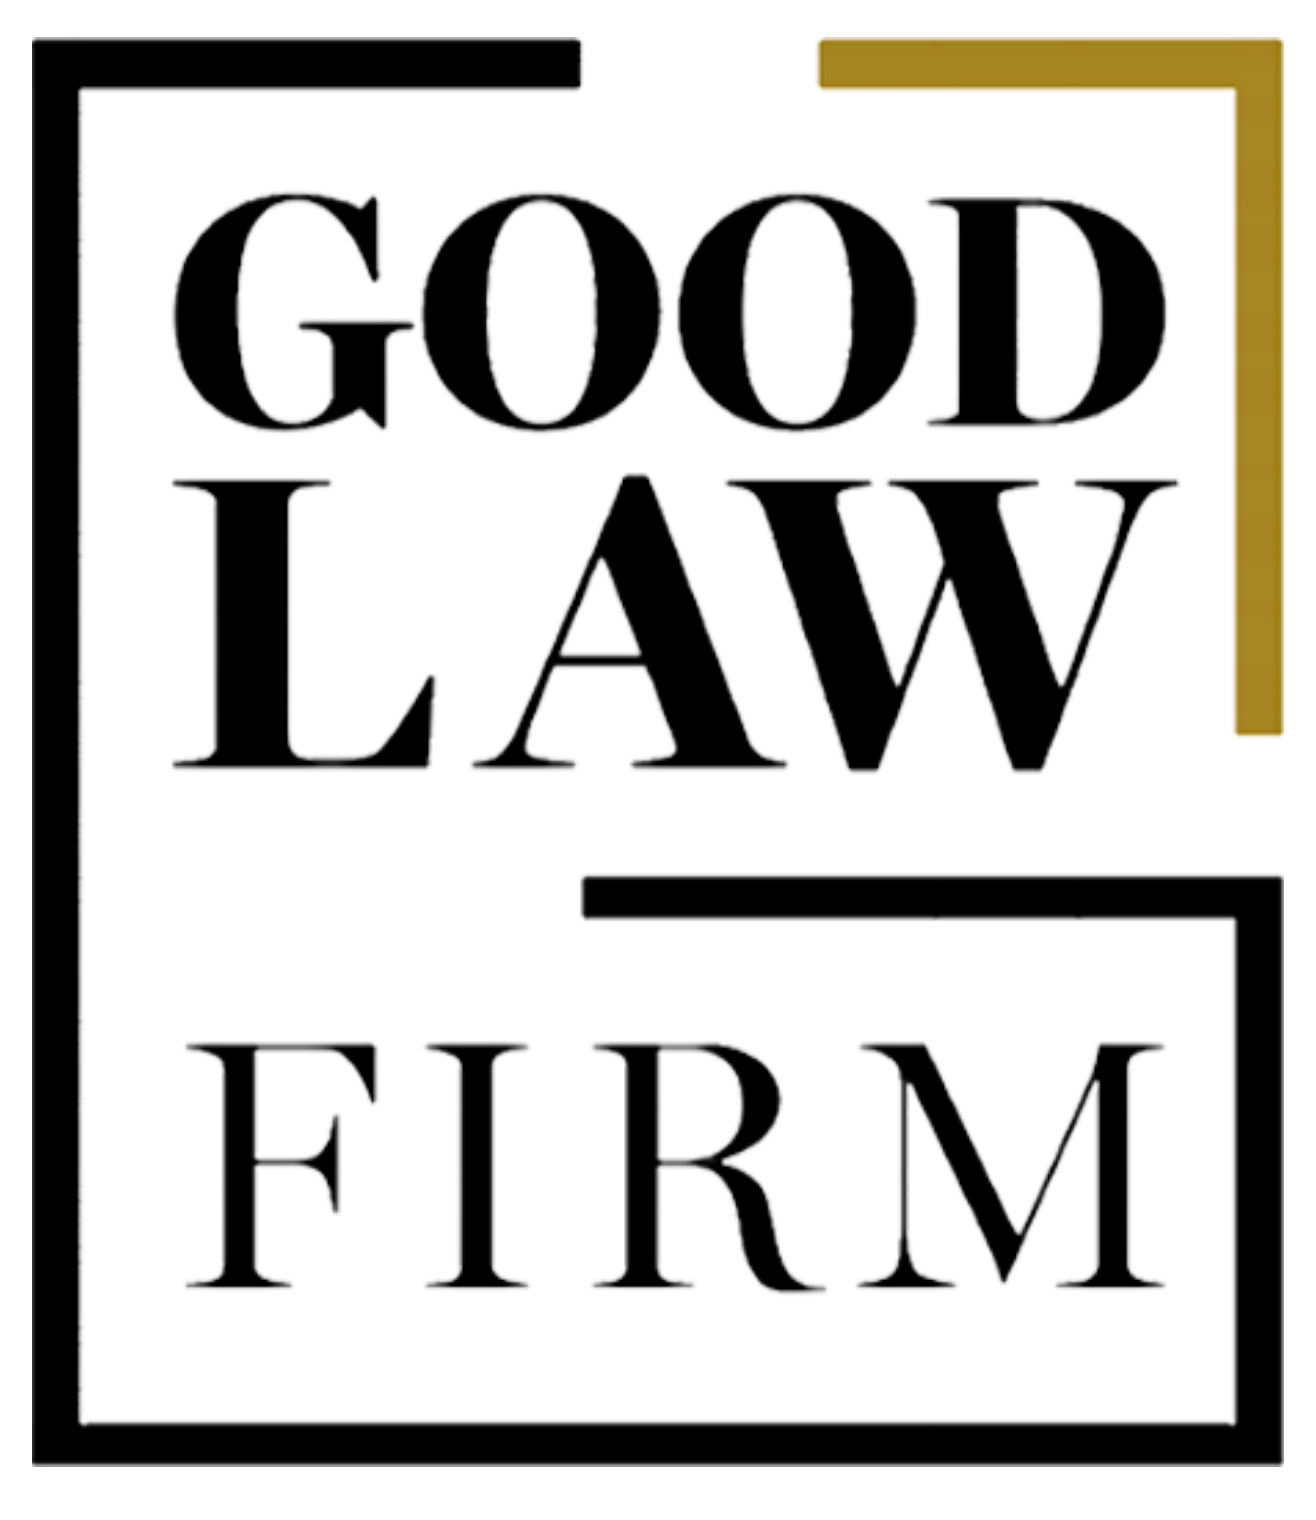 logo of Good Law Firm with the company name in writing, covered by a capital letter G